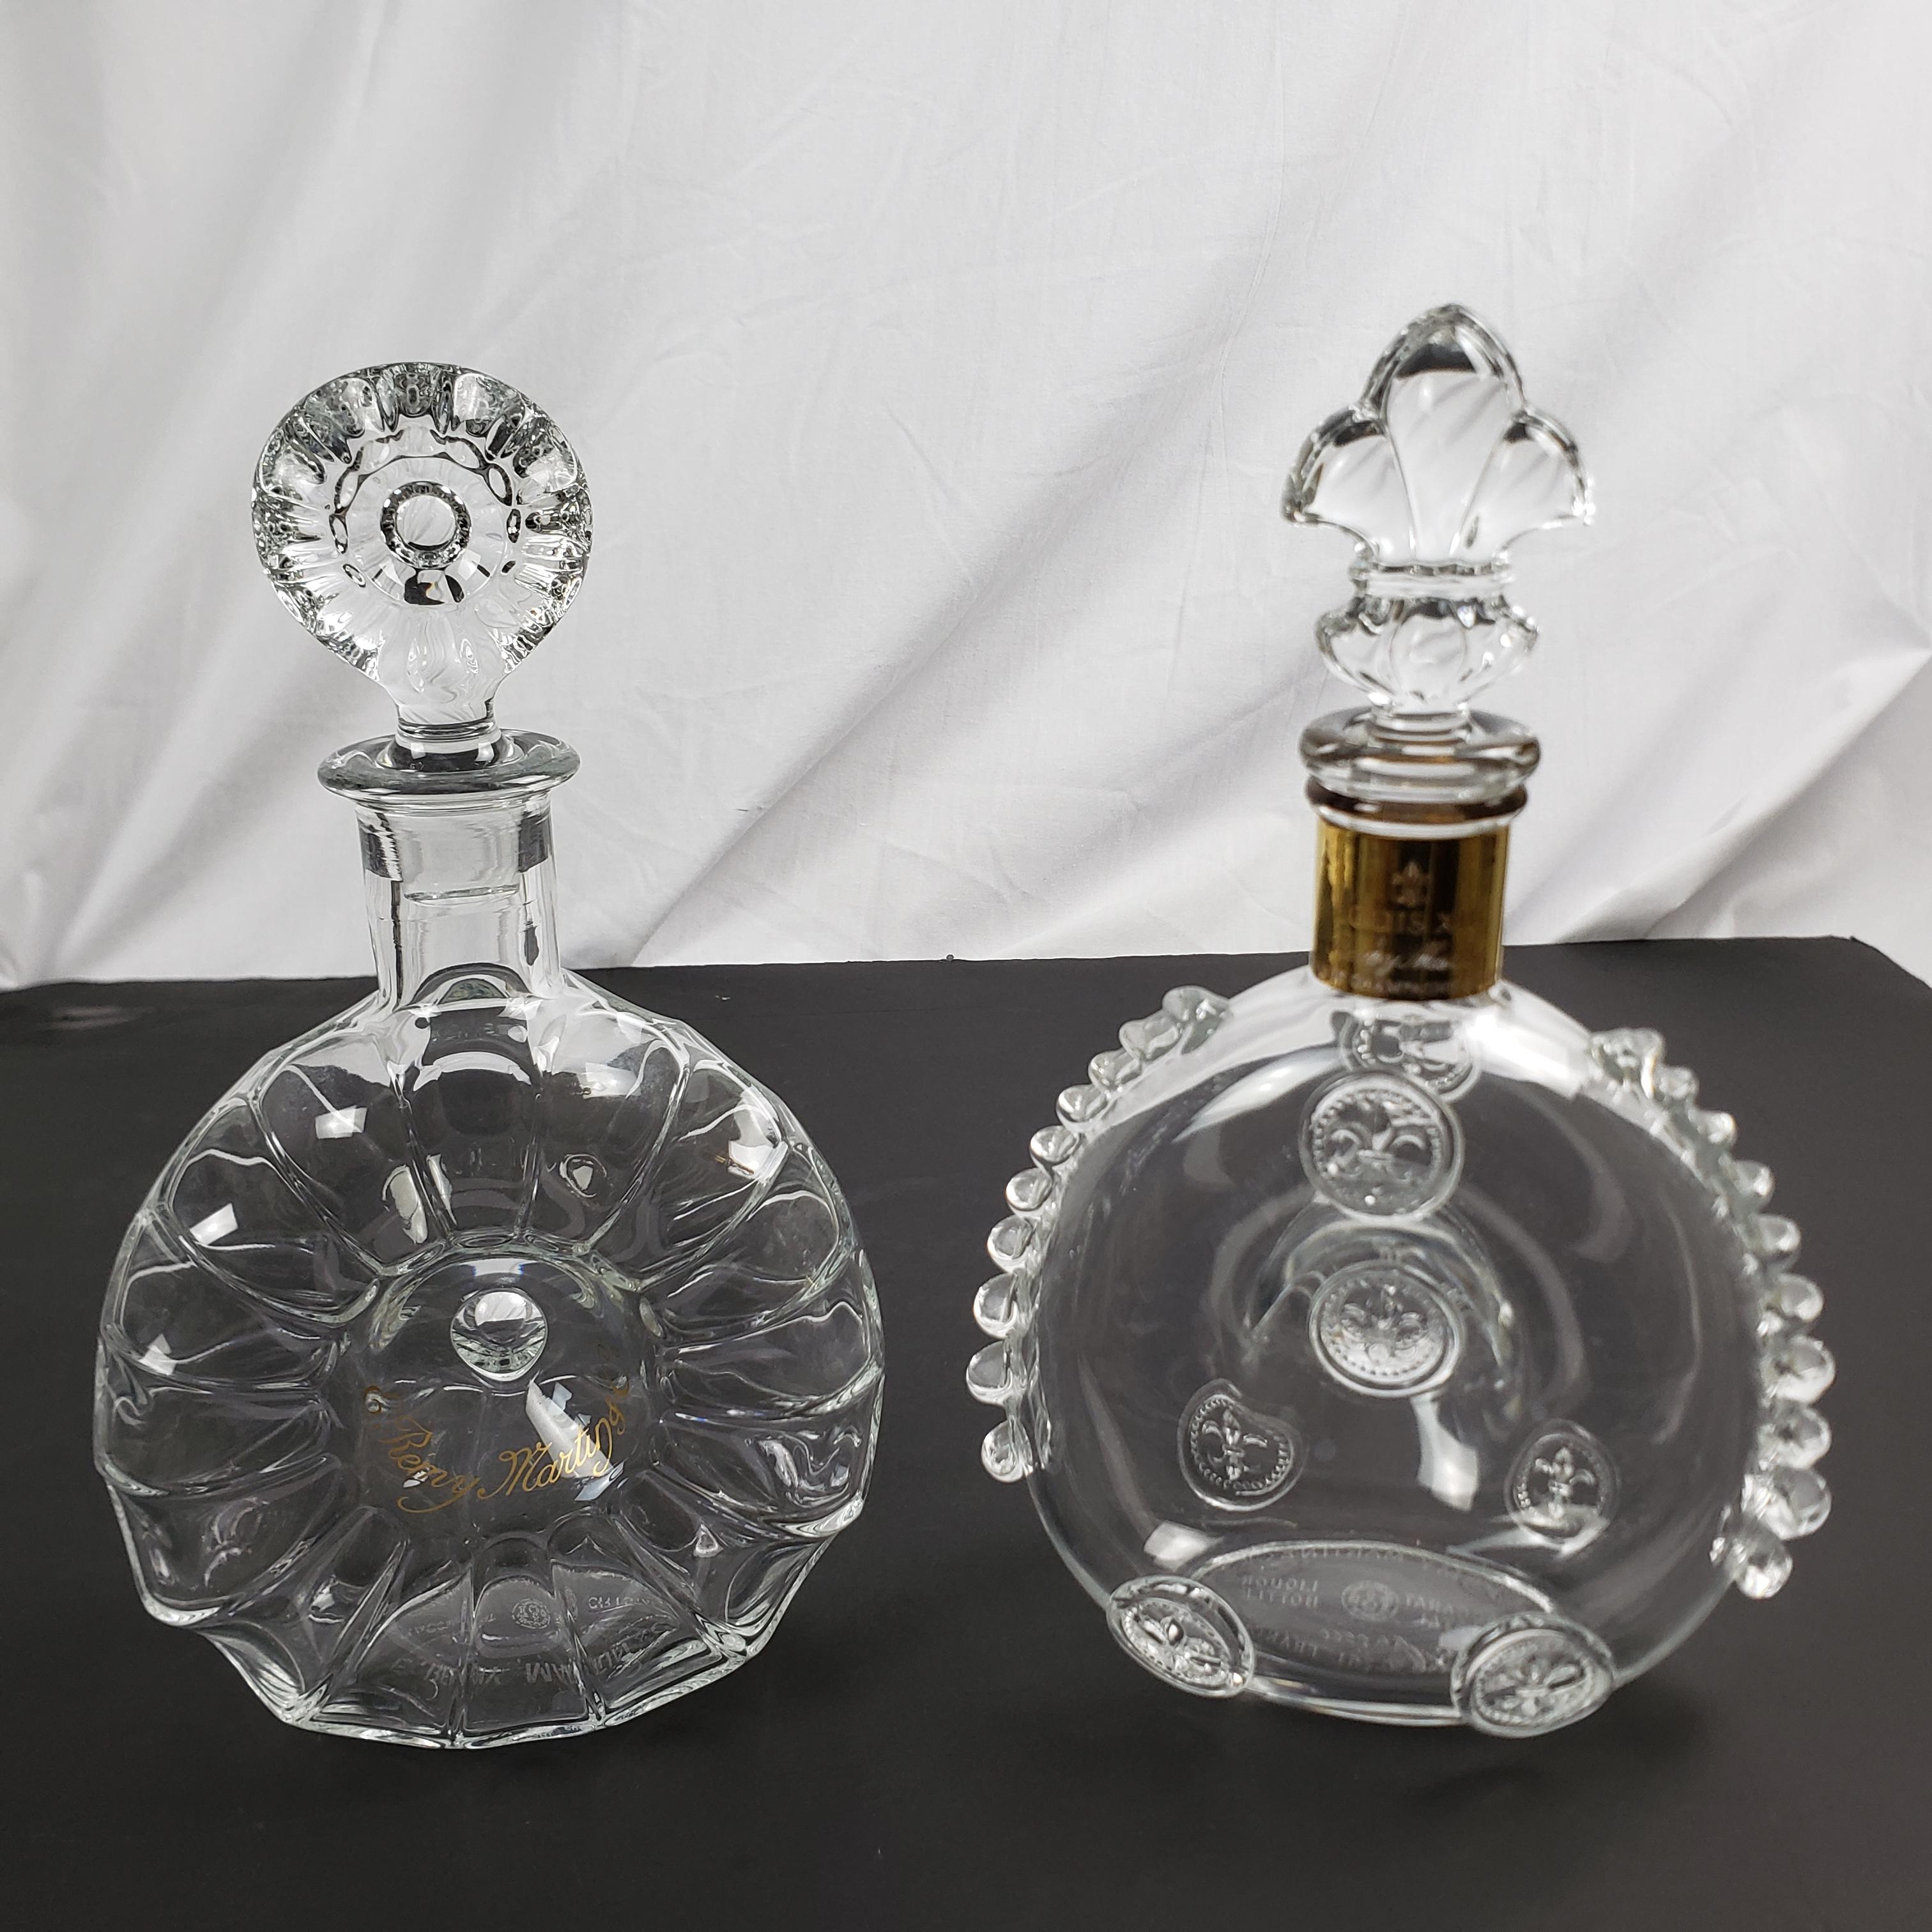 Pair of Baccarat Crystal Mid-Century Remy Martin Liquor Bottles or Decanters For Sale 6